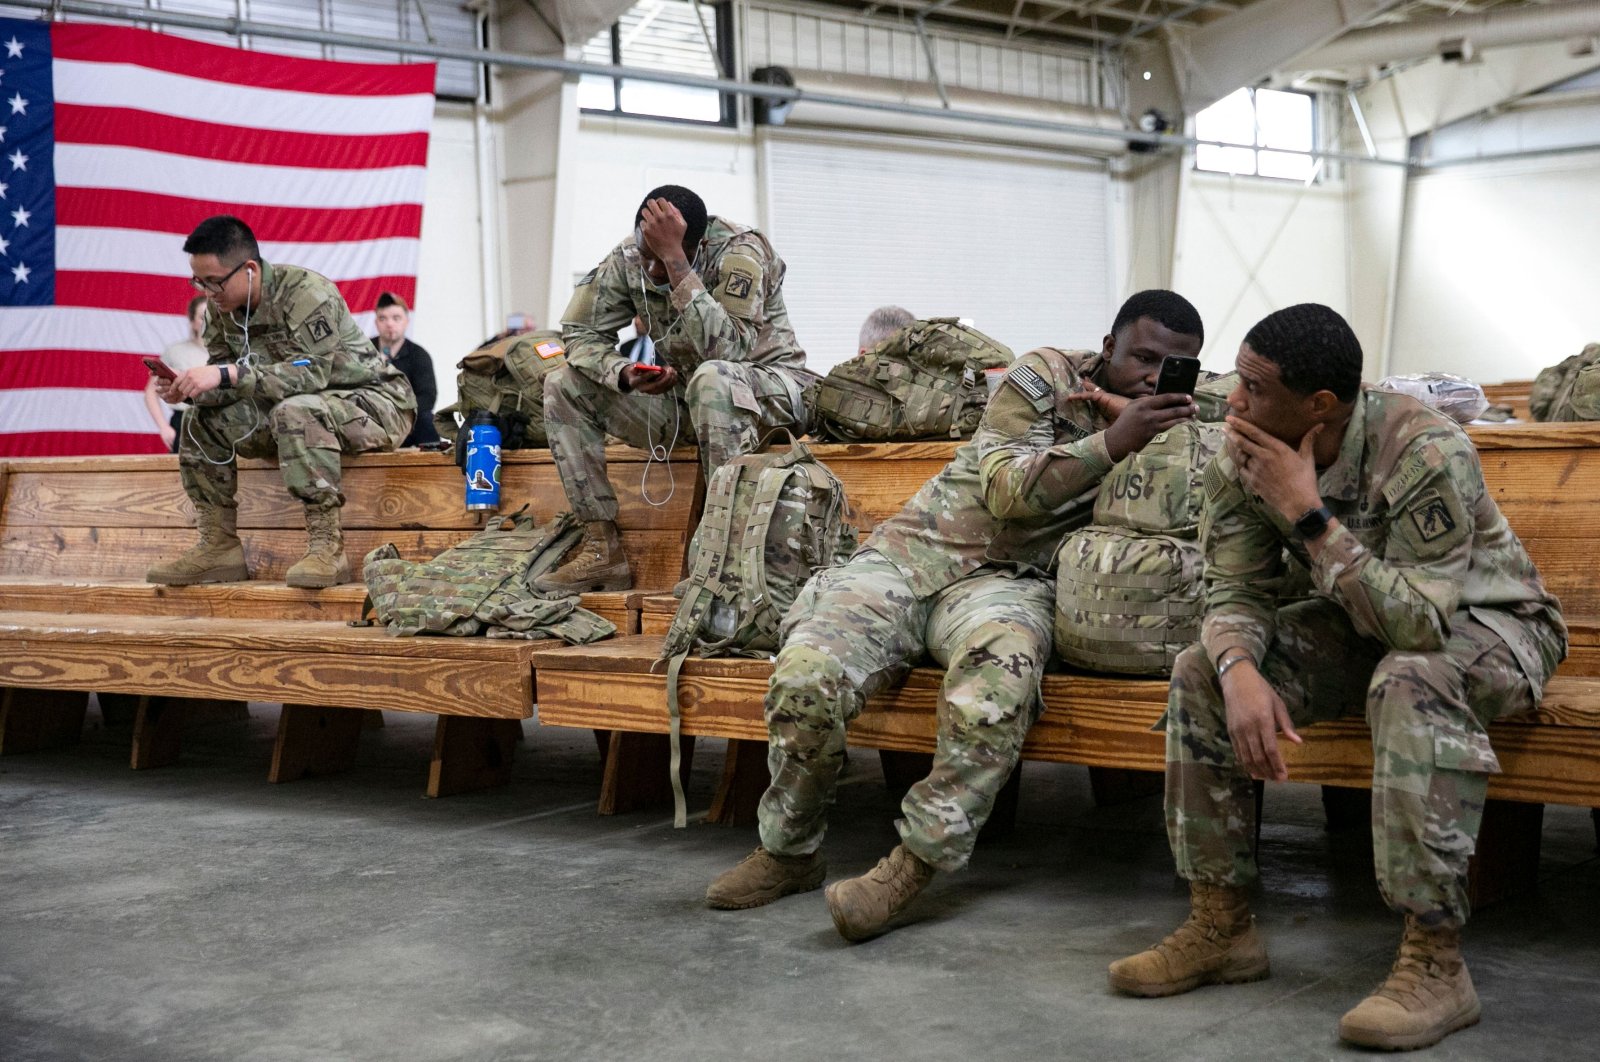 U.S. service members wait at the Pope Army Airfield before deploying to Europe at Fort Bragg, North Carolina, Feb. 3, 2022. (AFP Photo)